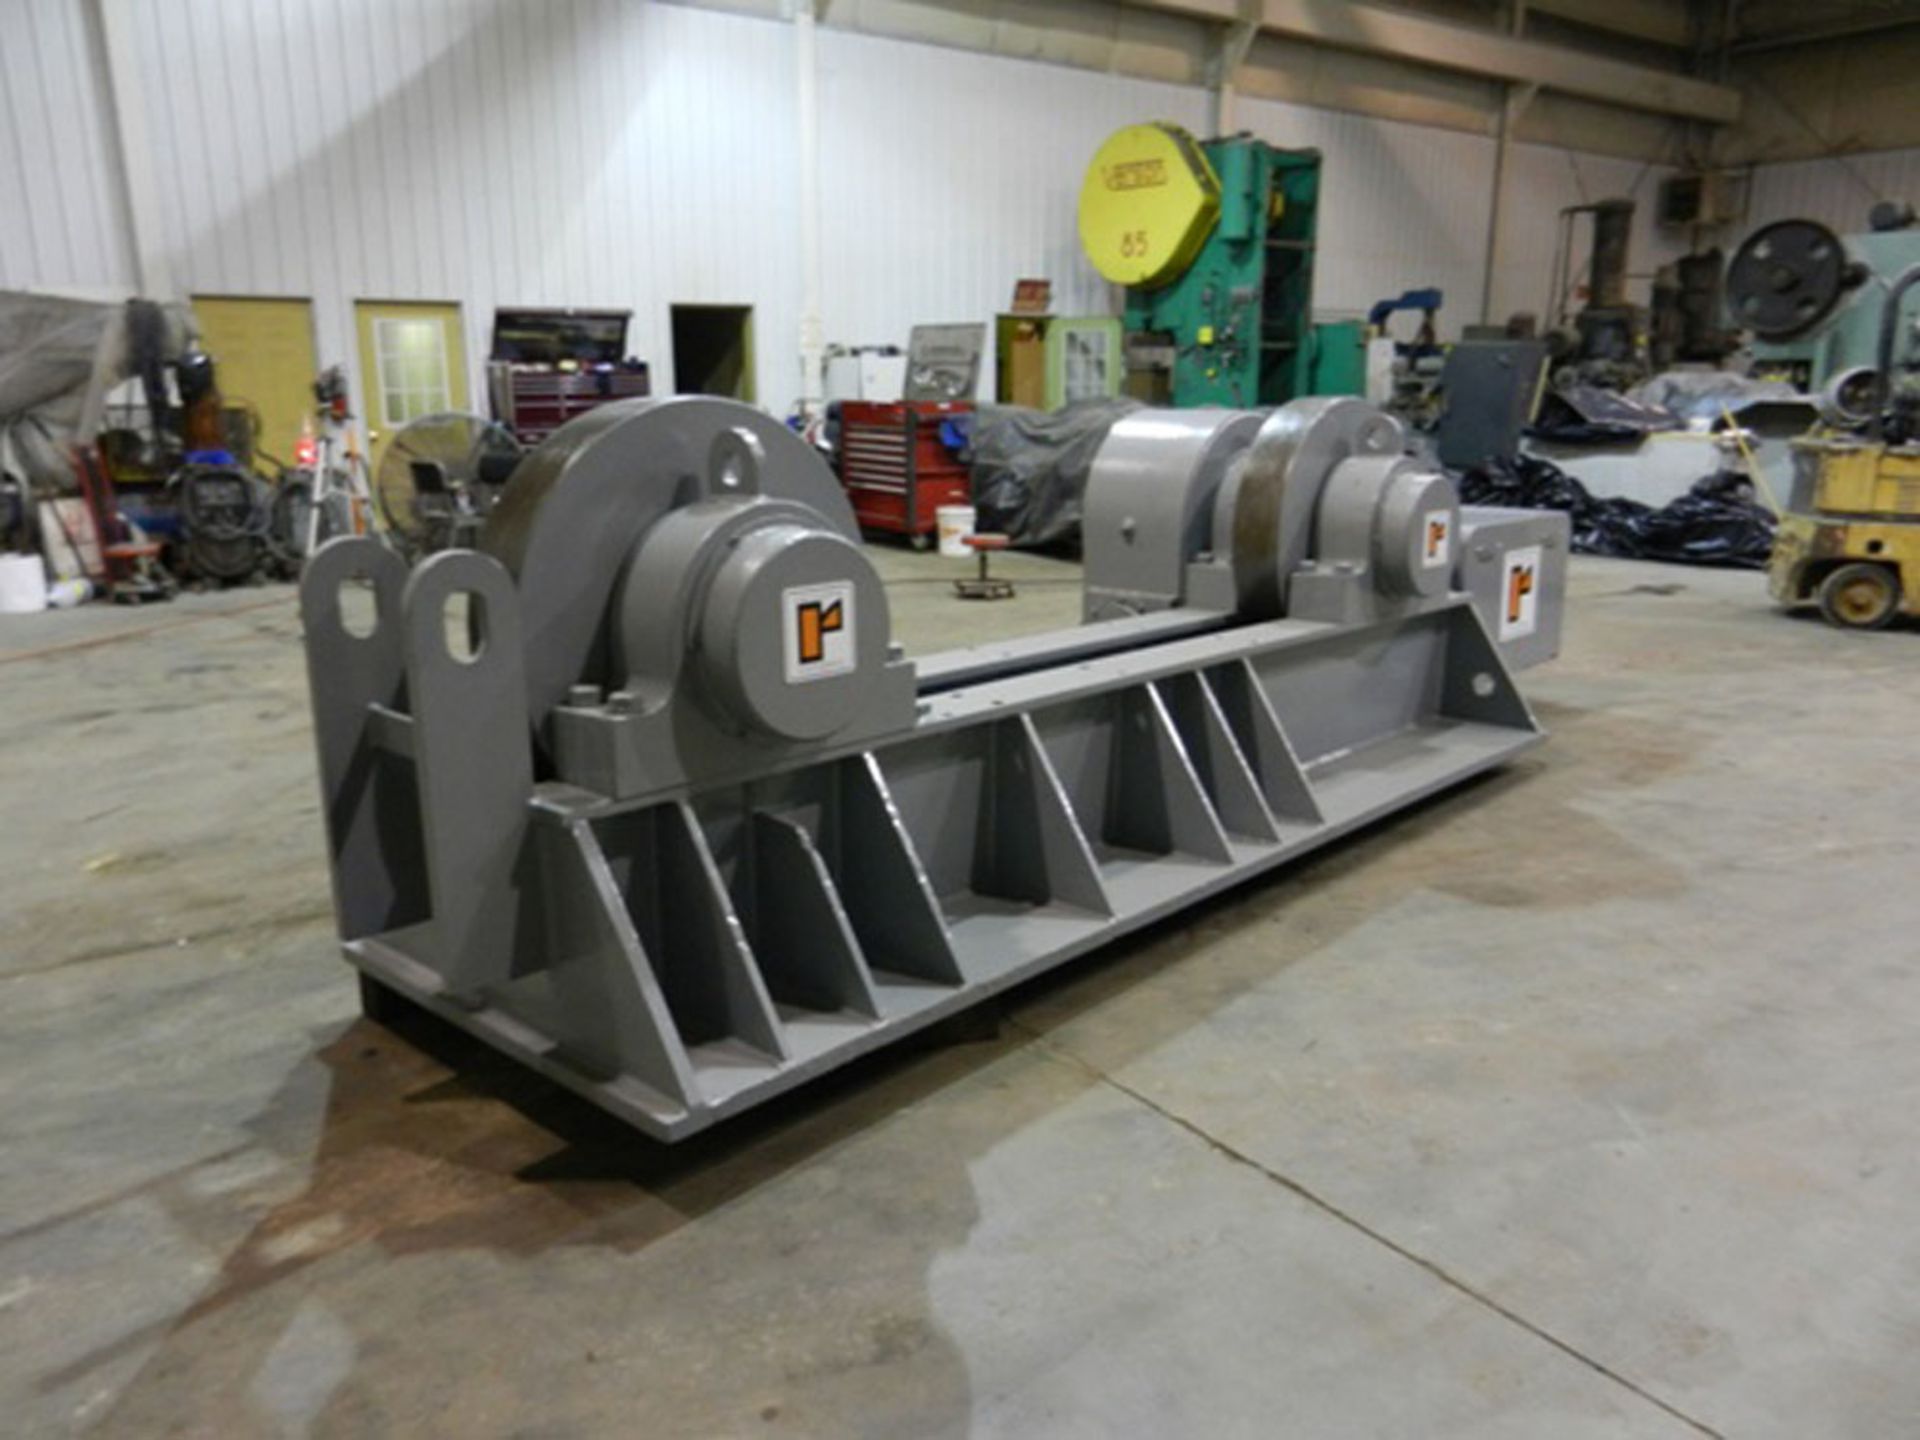 Ransome Driver Power Tank Roll, 800 Ton, Mdl: 800T - Painesville, OH - 7371P - Image 3 of 5